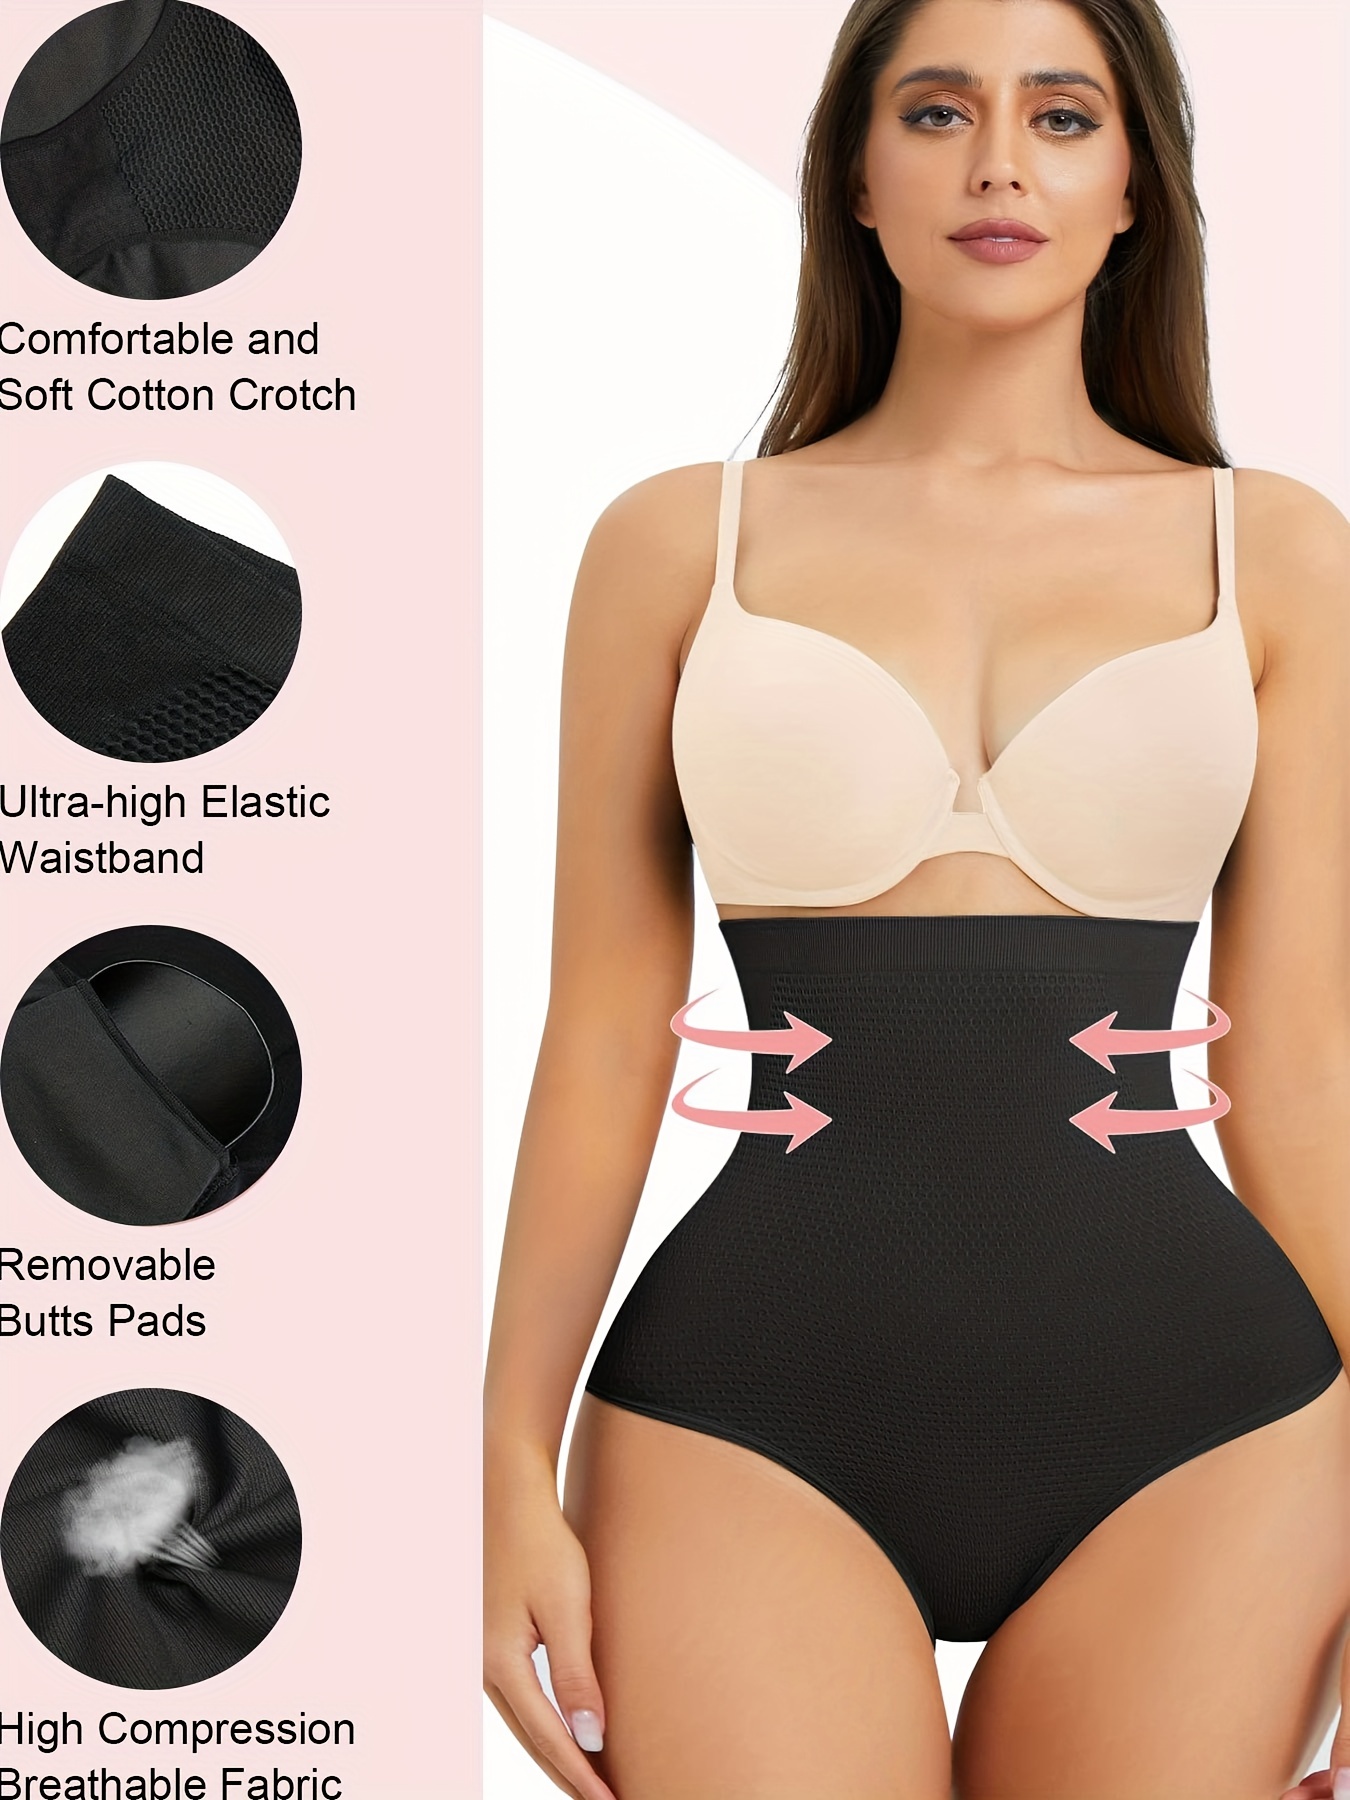 Buy Comfortable Cotton Spandex Body Seamless Shapewear Breathable